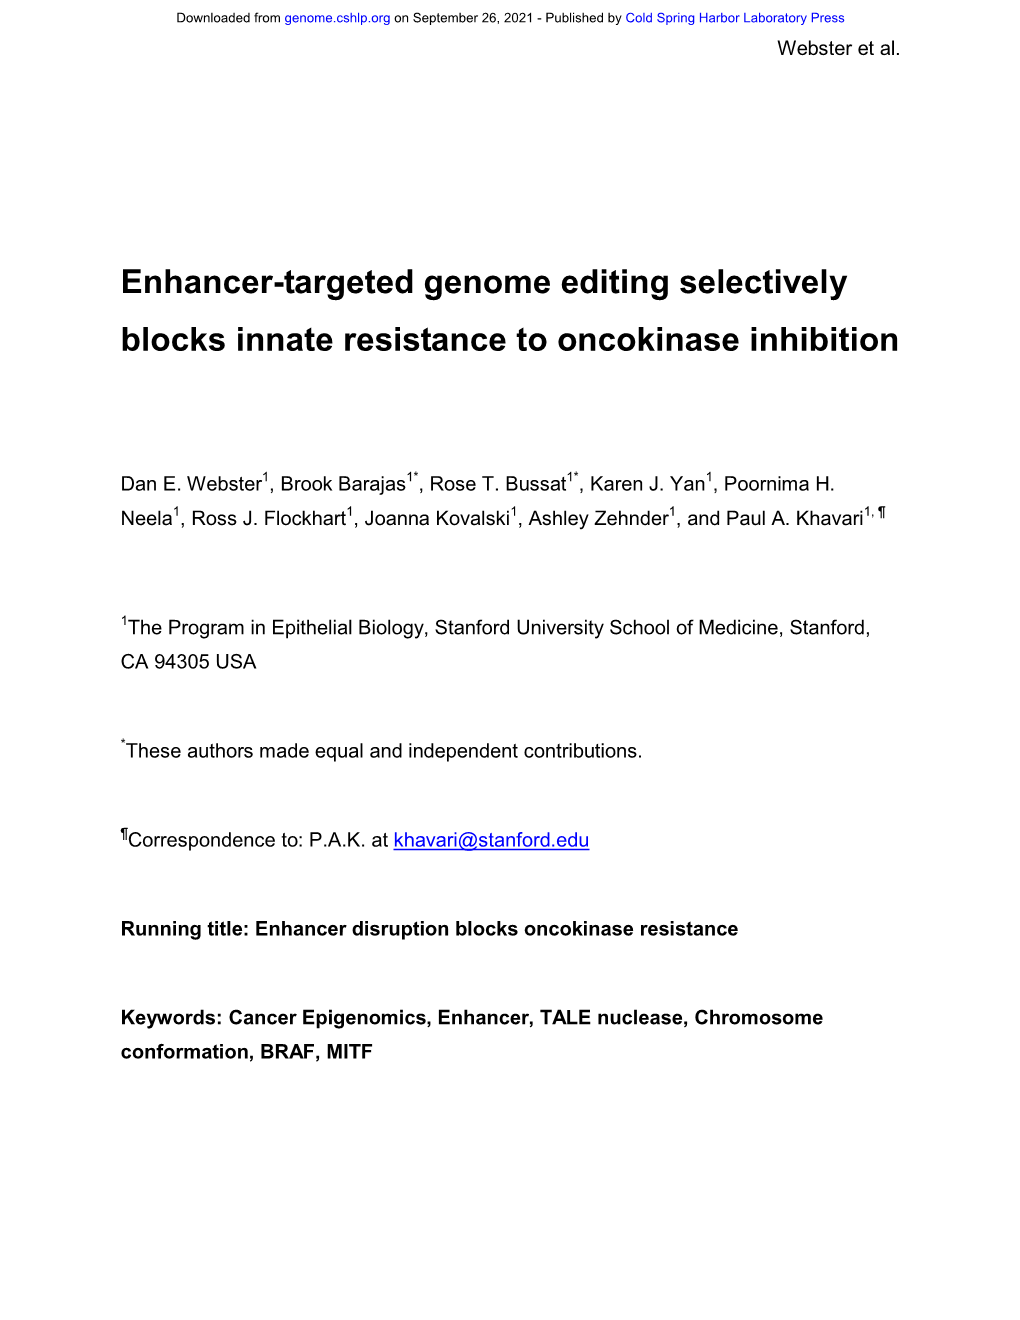 Enhancer-Targeted Genome Editing Selectively Blocks Innate Resistance to Oncokinase Inhibition